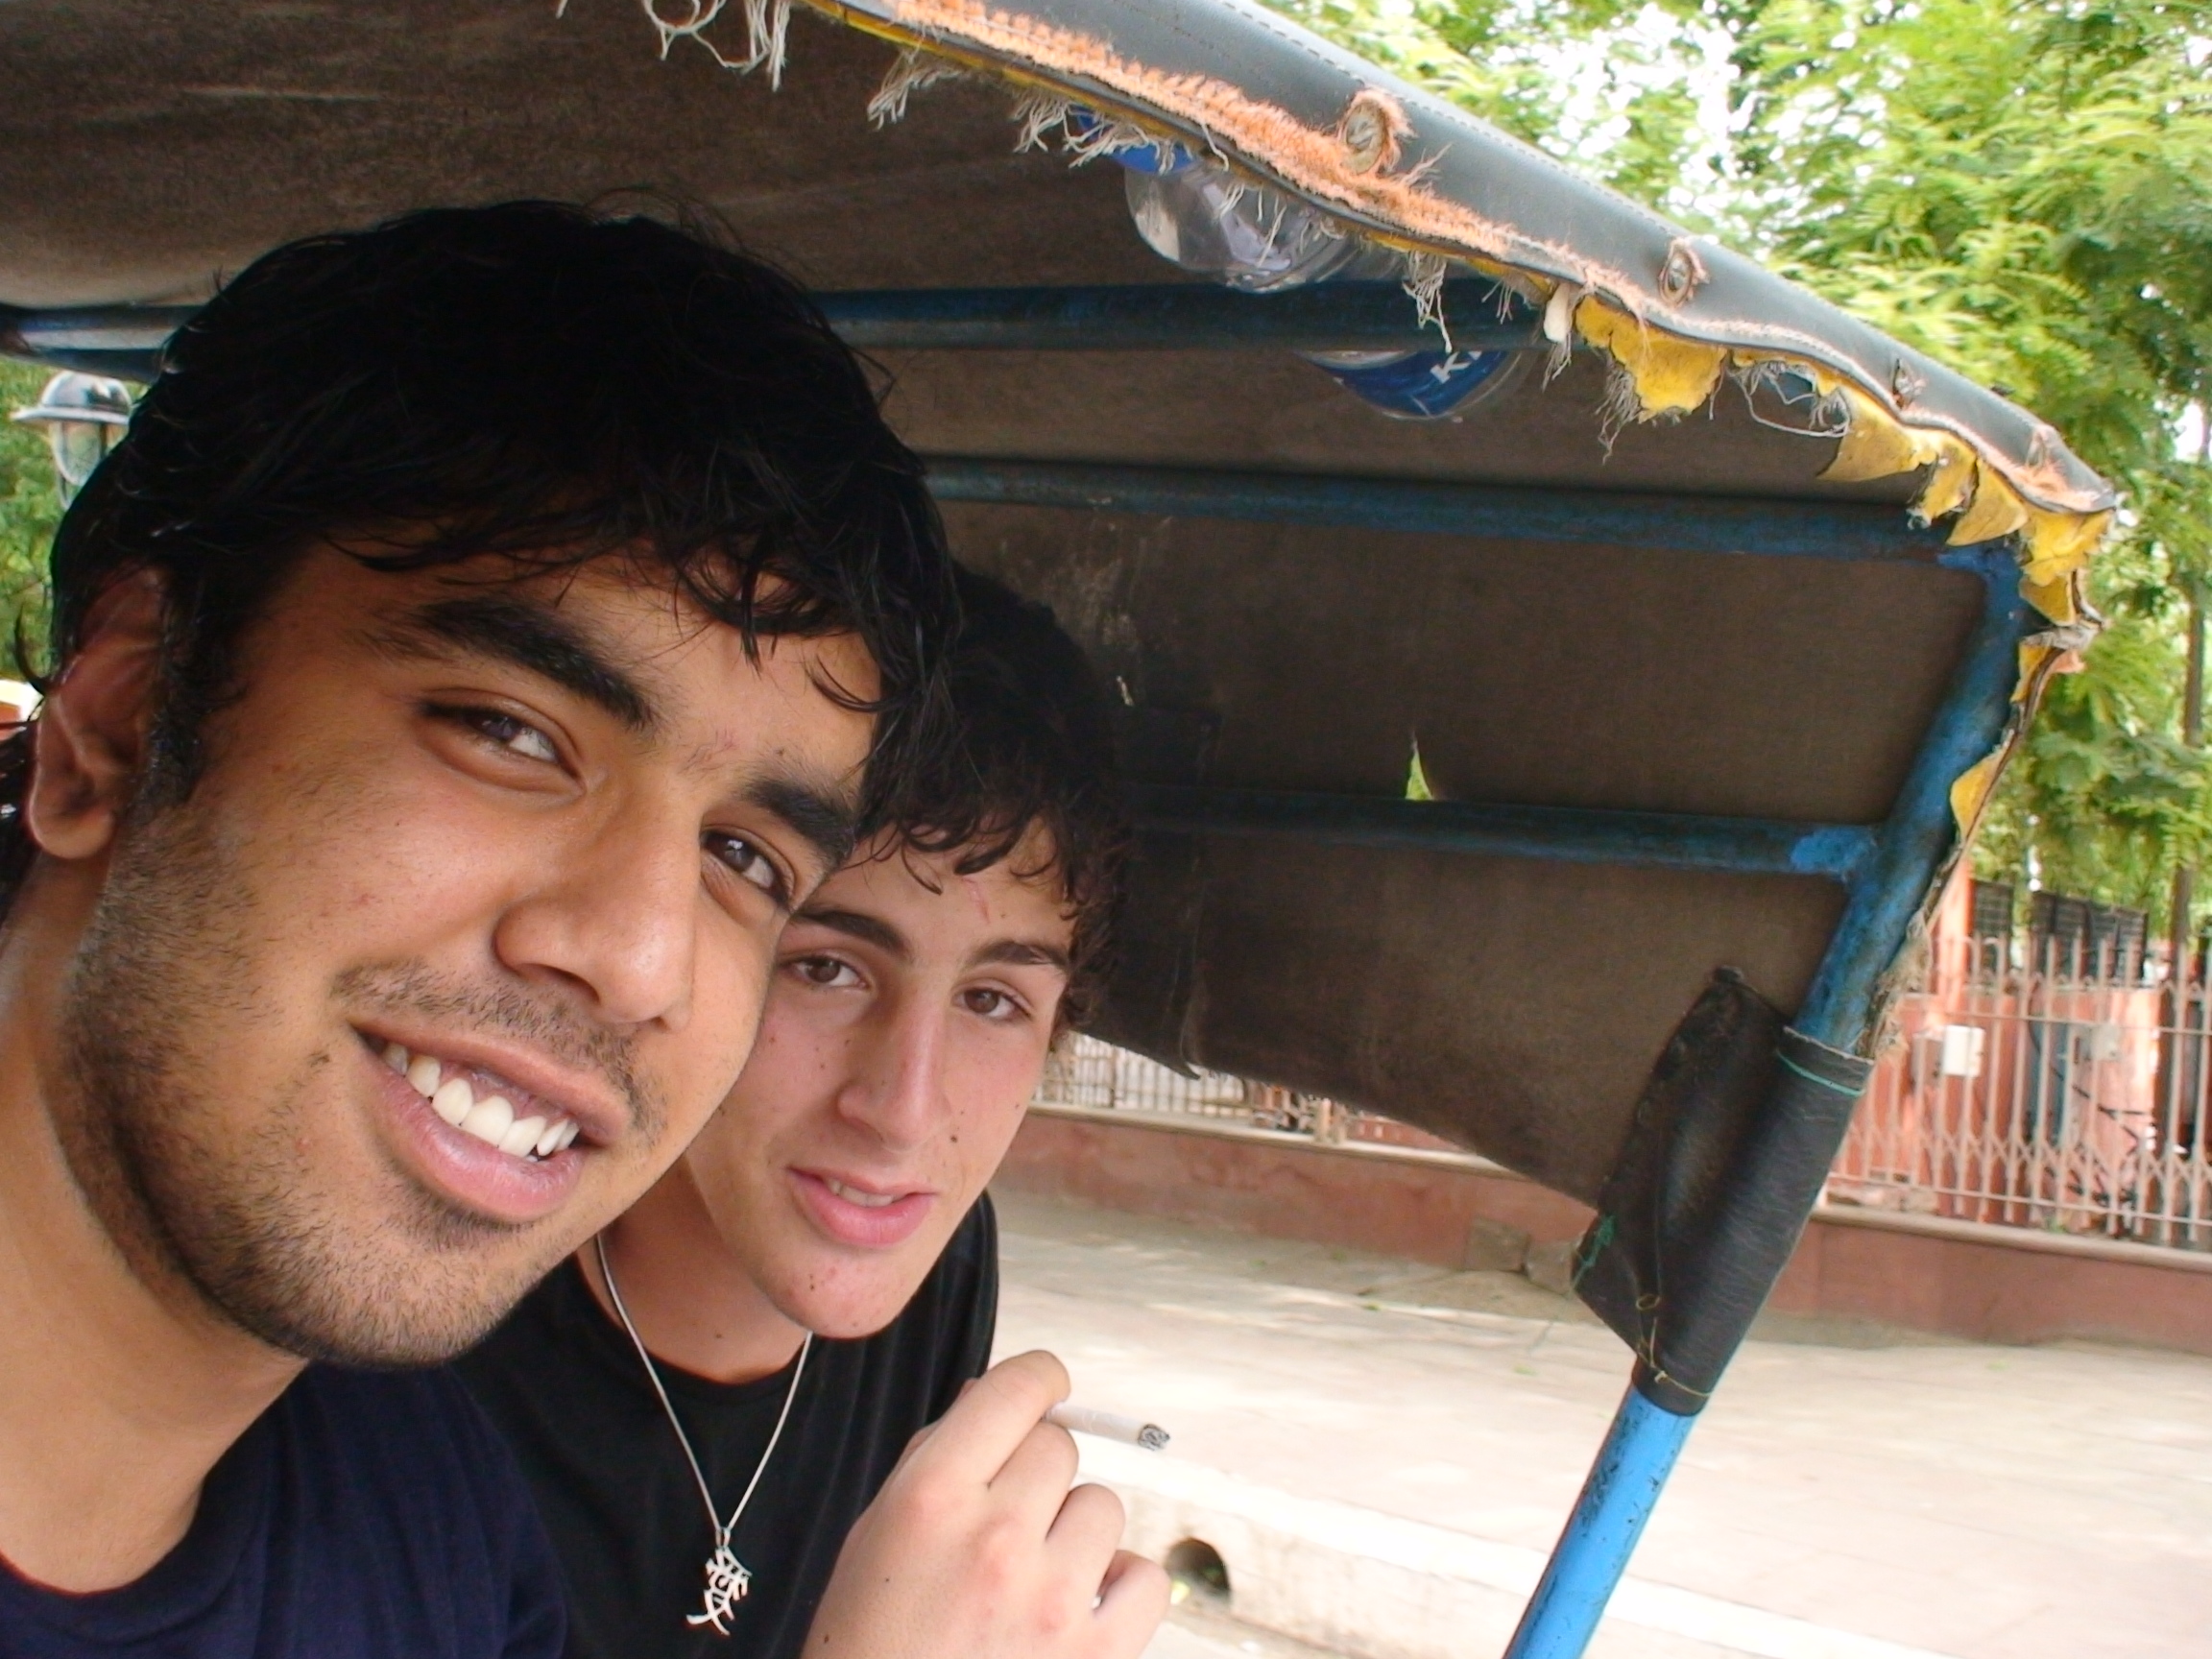 My friend and I are in the rickshaw just before smoking with the priests